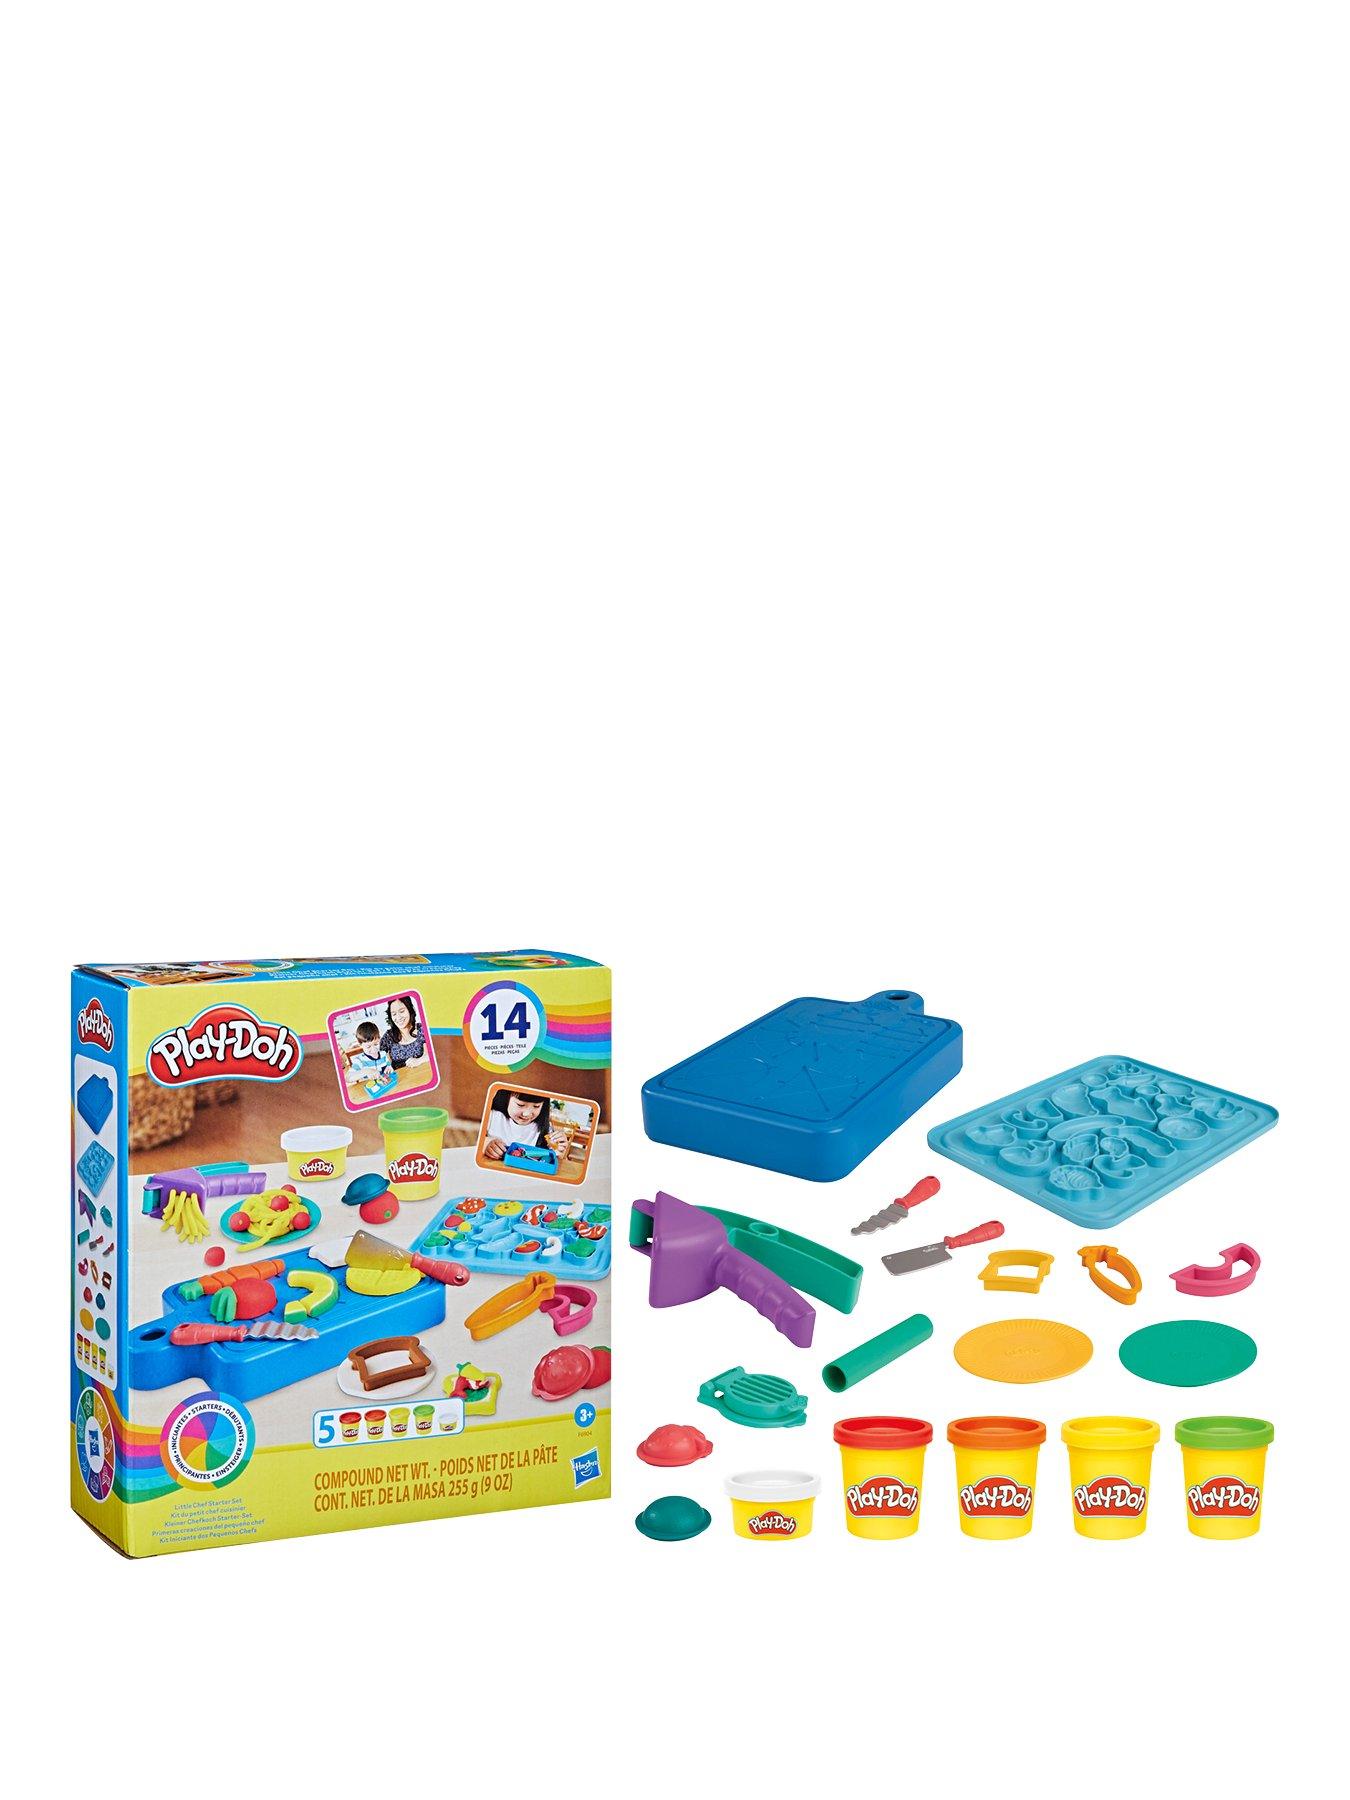 44 Pieces Play Dough Accessories Set Colour Random Set for Kids Playdough  Tools with Various Plastic Molds,Rolling Pins, Cutters( Accessories color  random)